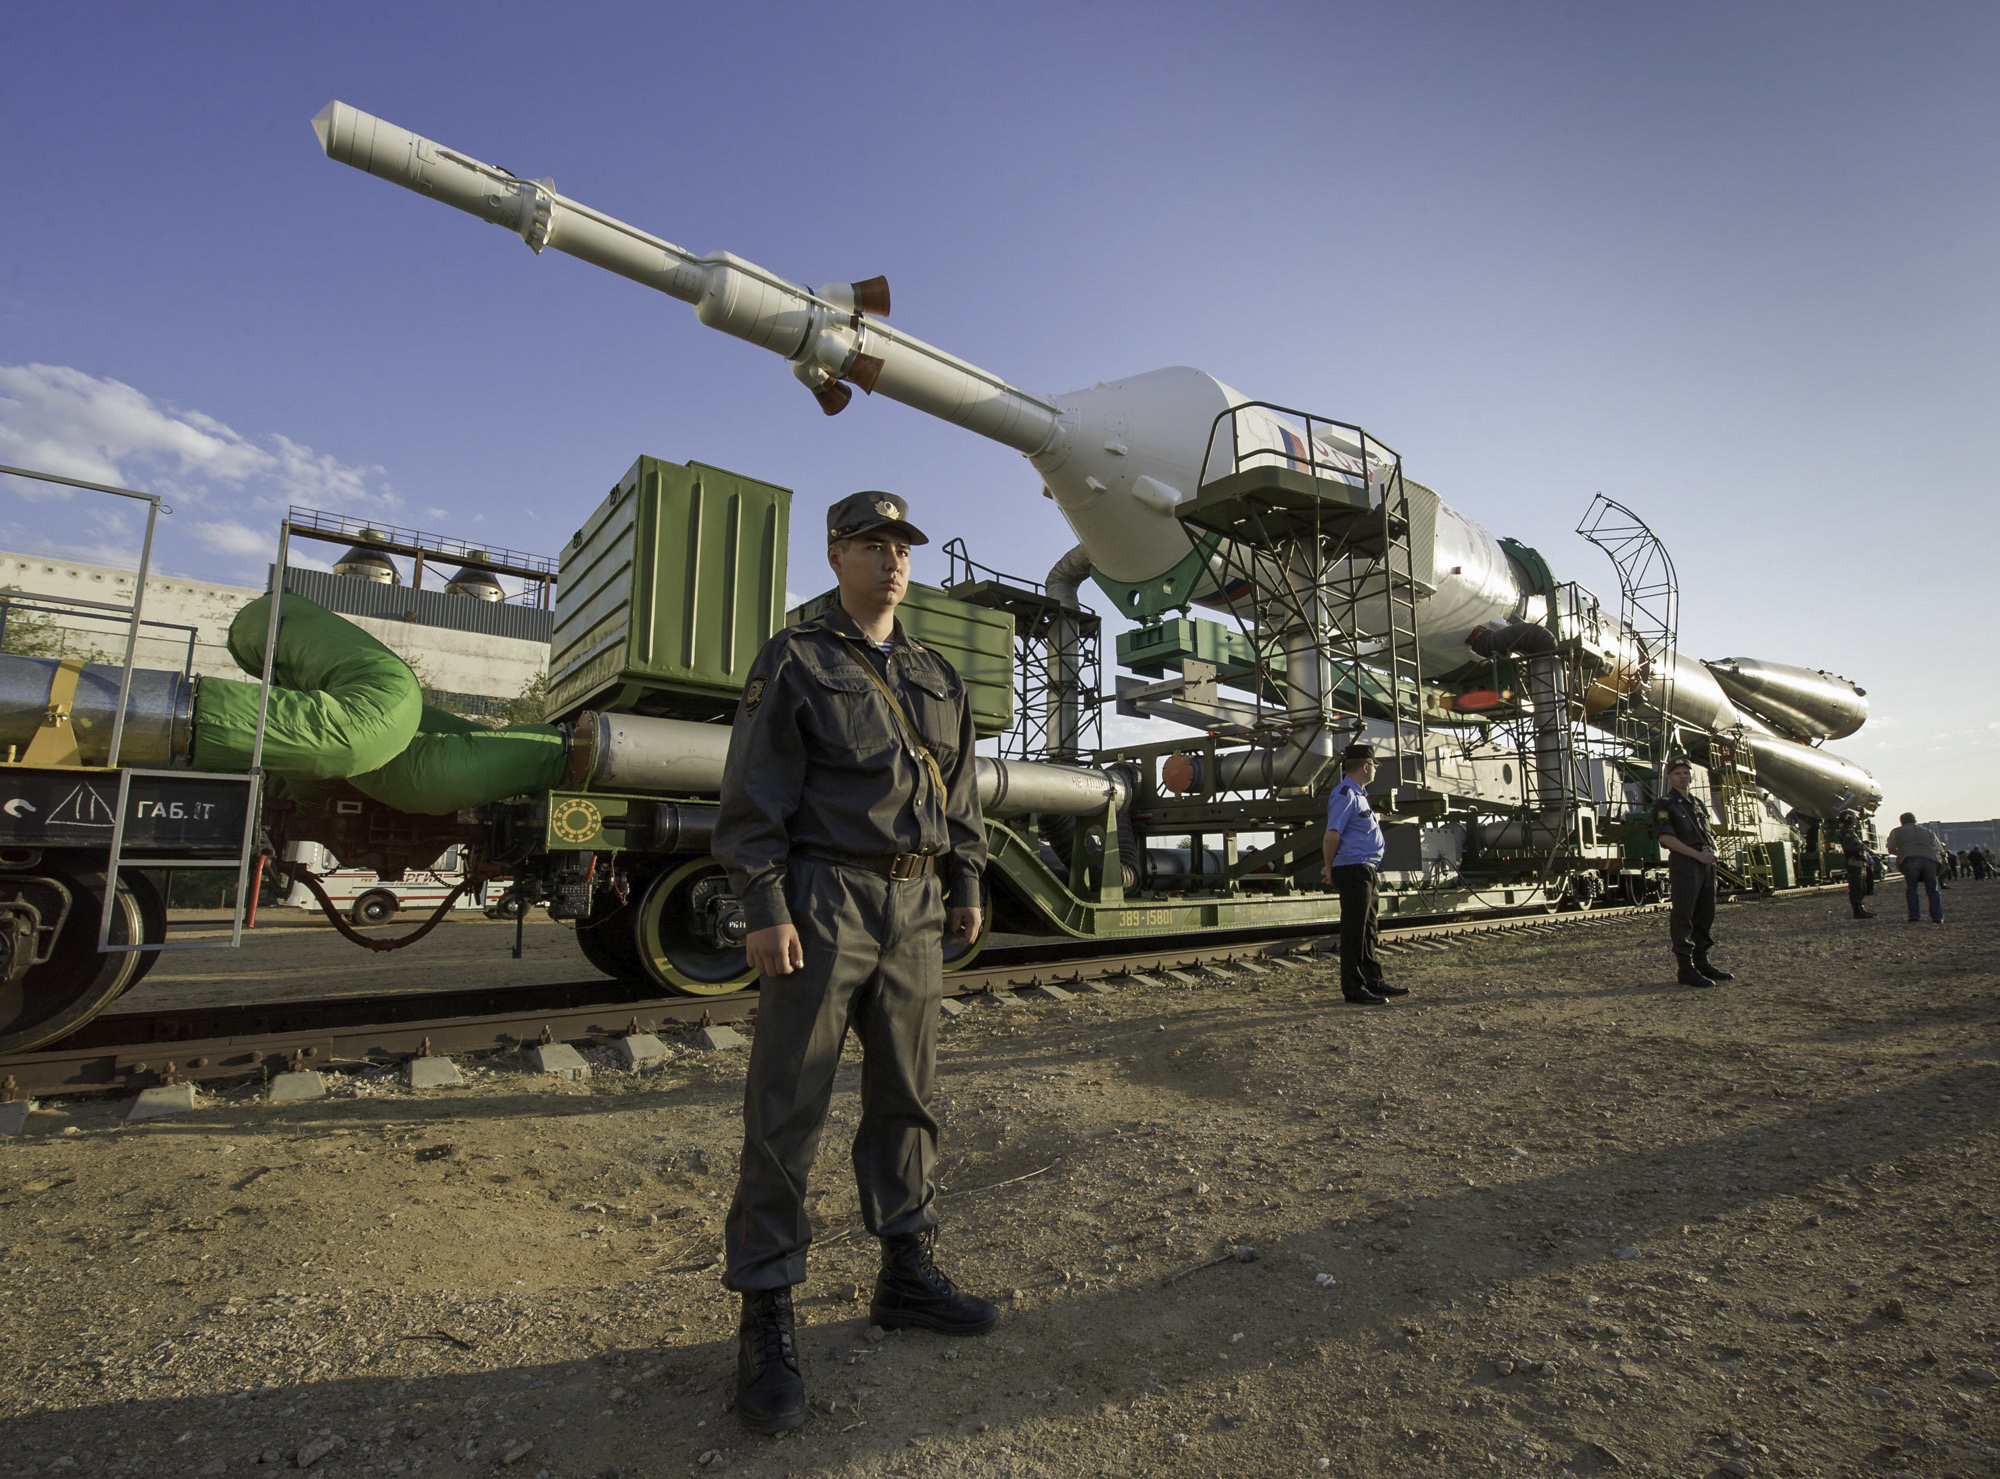  The Soyuz TMA-02M spacecraft is rolled out by train on its way to the launch pad at the Baikonur Cosmodrome, Kazakhstan, Sunday, June 5, 2011. The launch of the Soyuz spacecraft with Expedition 28 Soyuz Commander Sergei Volkov of Russia, NASA Flight